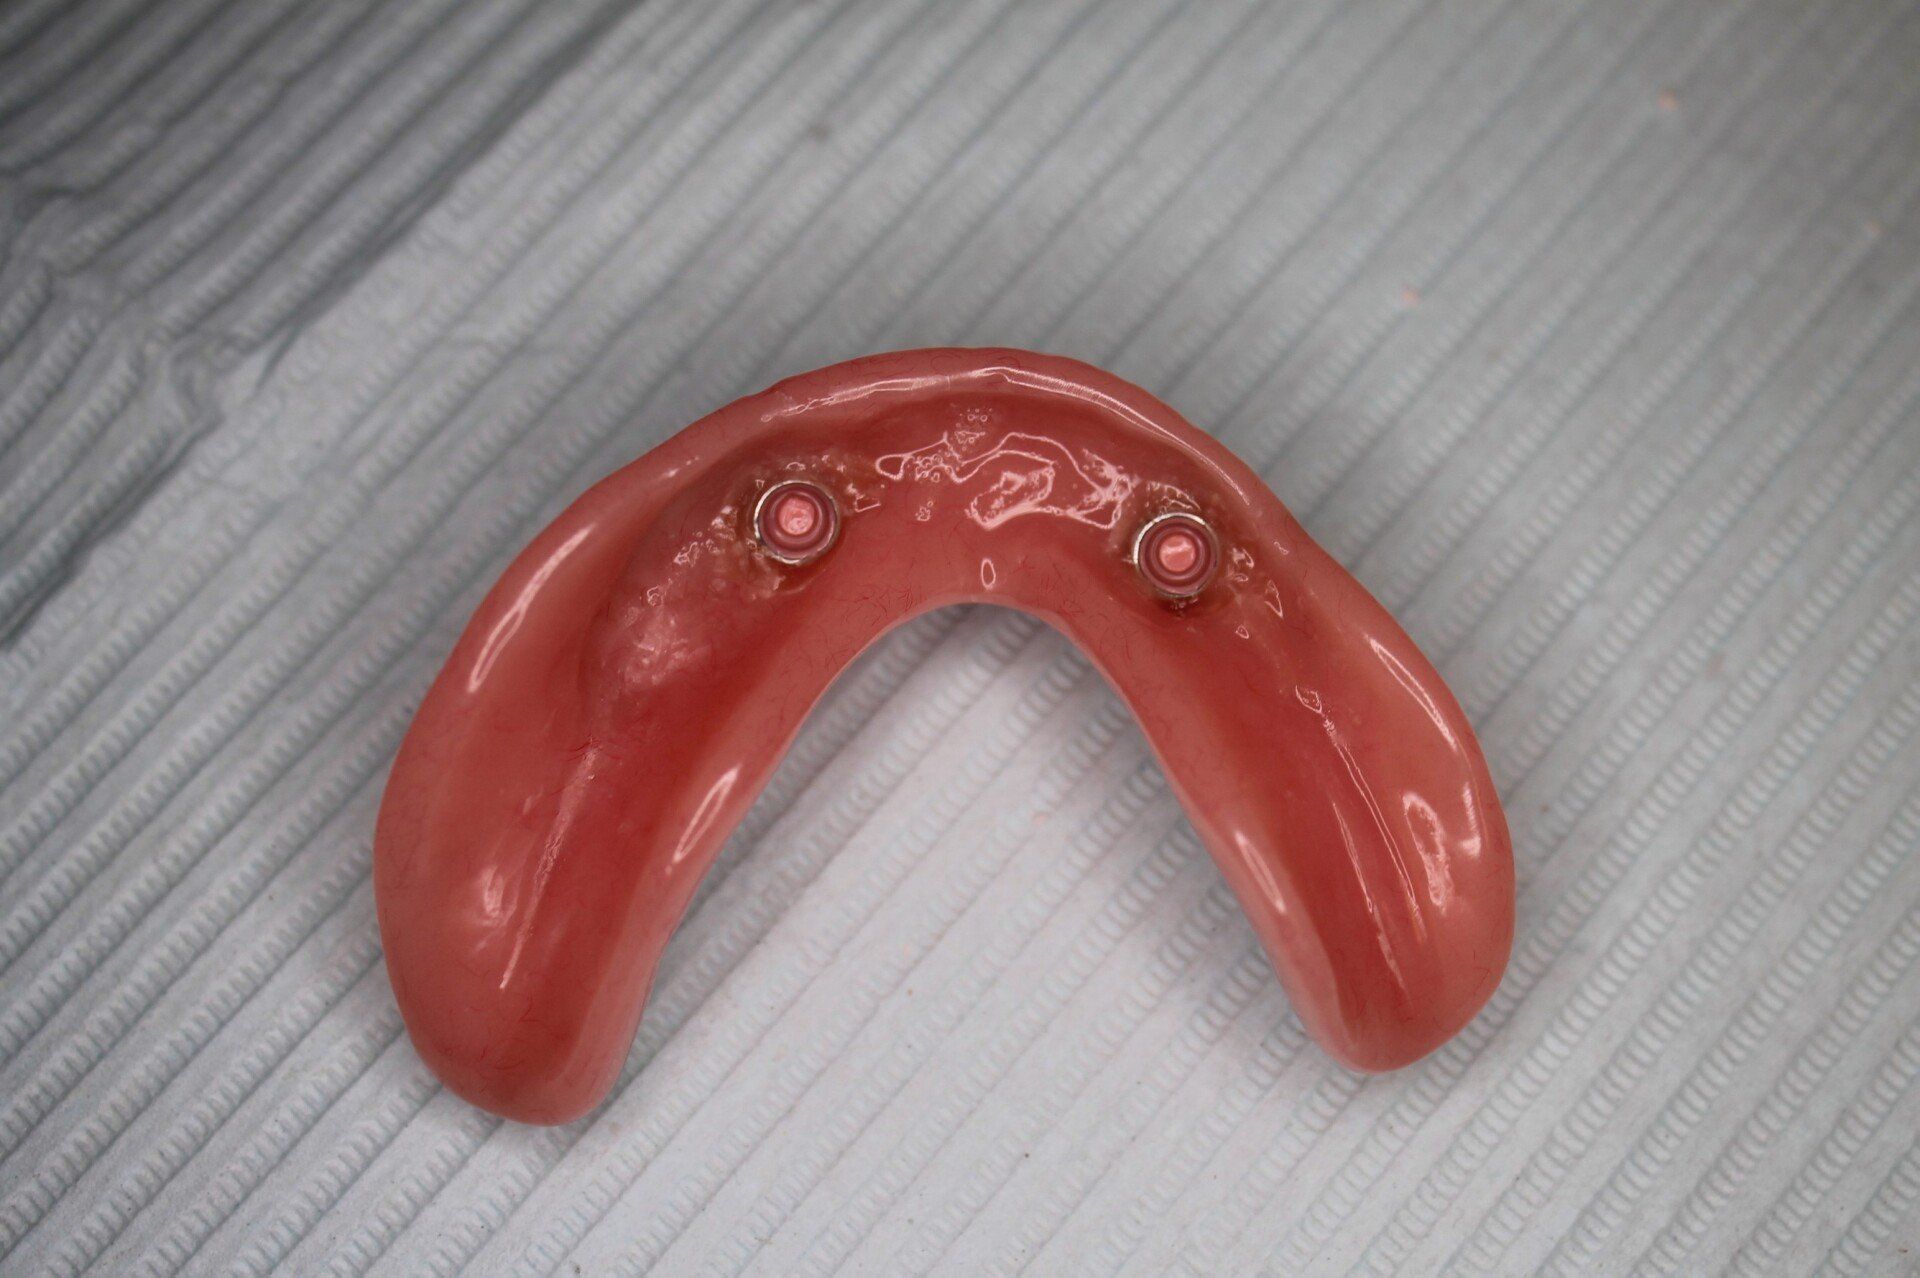 Lower complete denture with two overdenture Locator attachments to connect to implants.